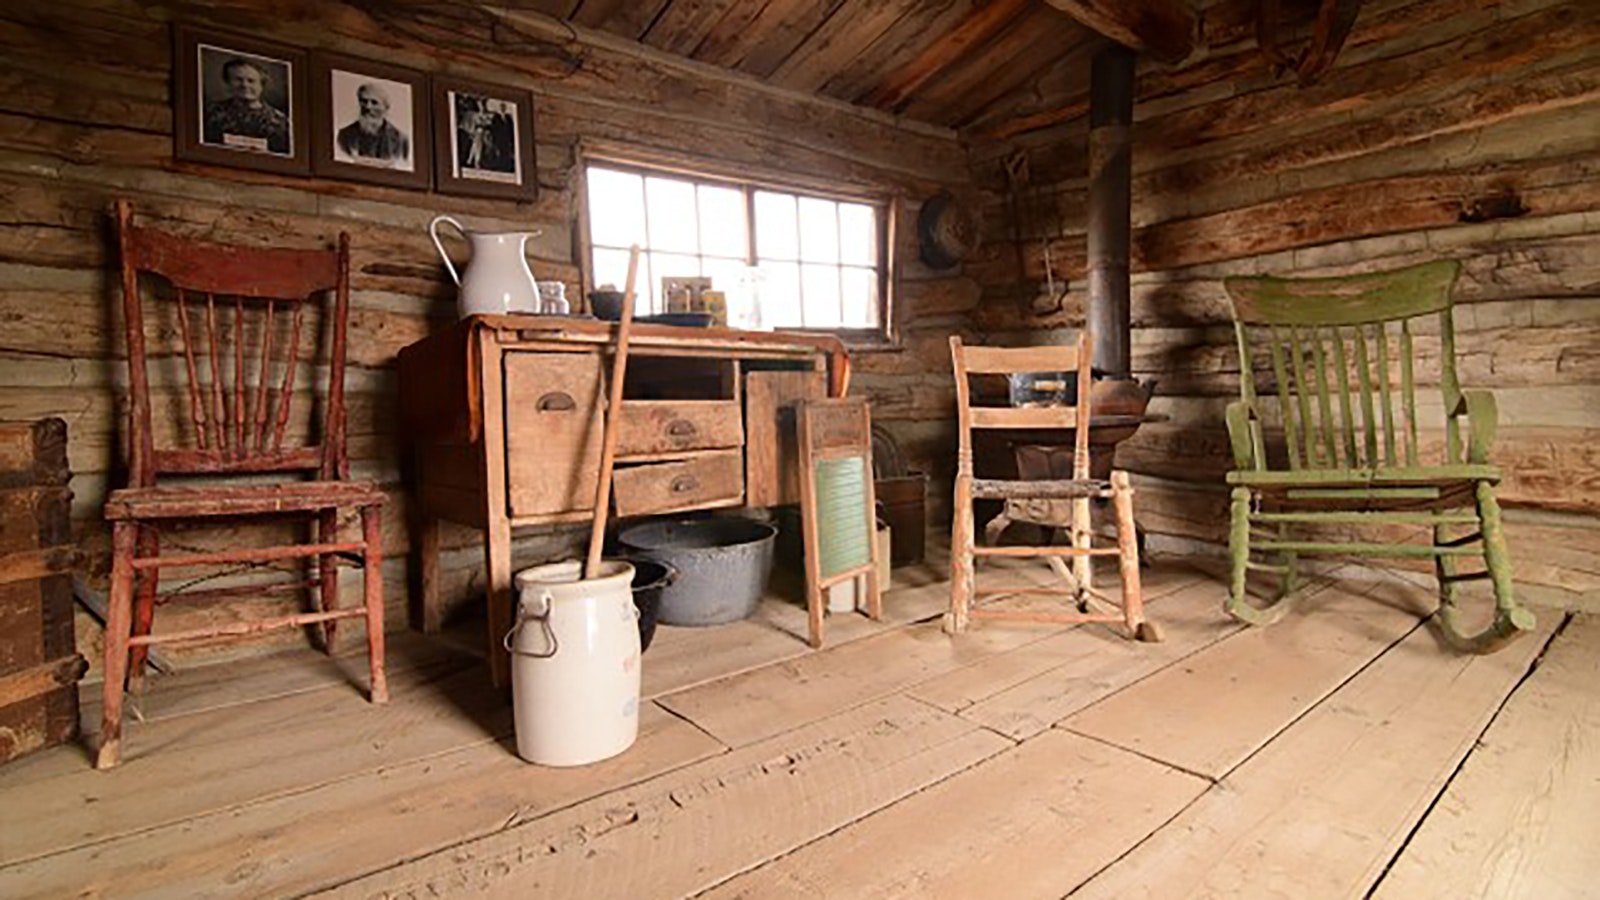 The interior of the Morrison cabin building depicts what home was like for a pioneering Wyoming family.